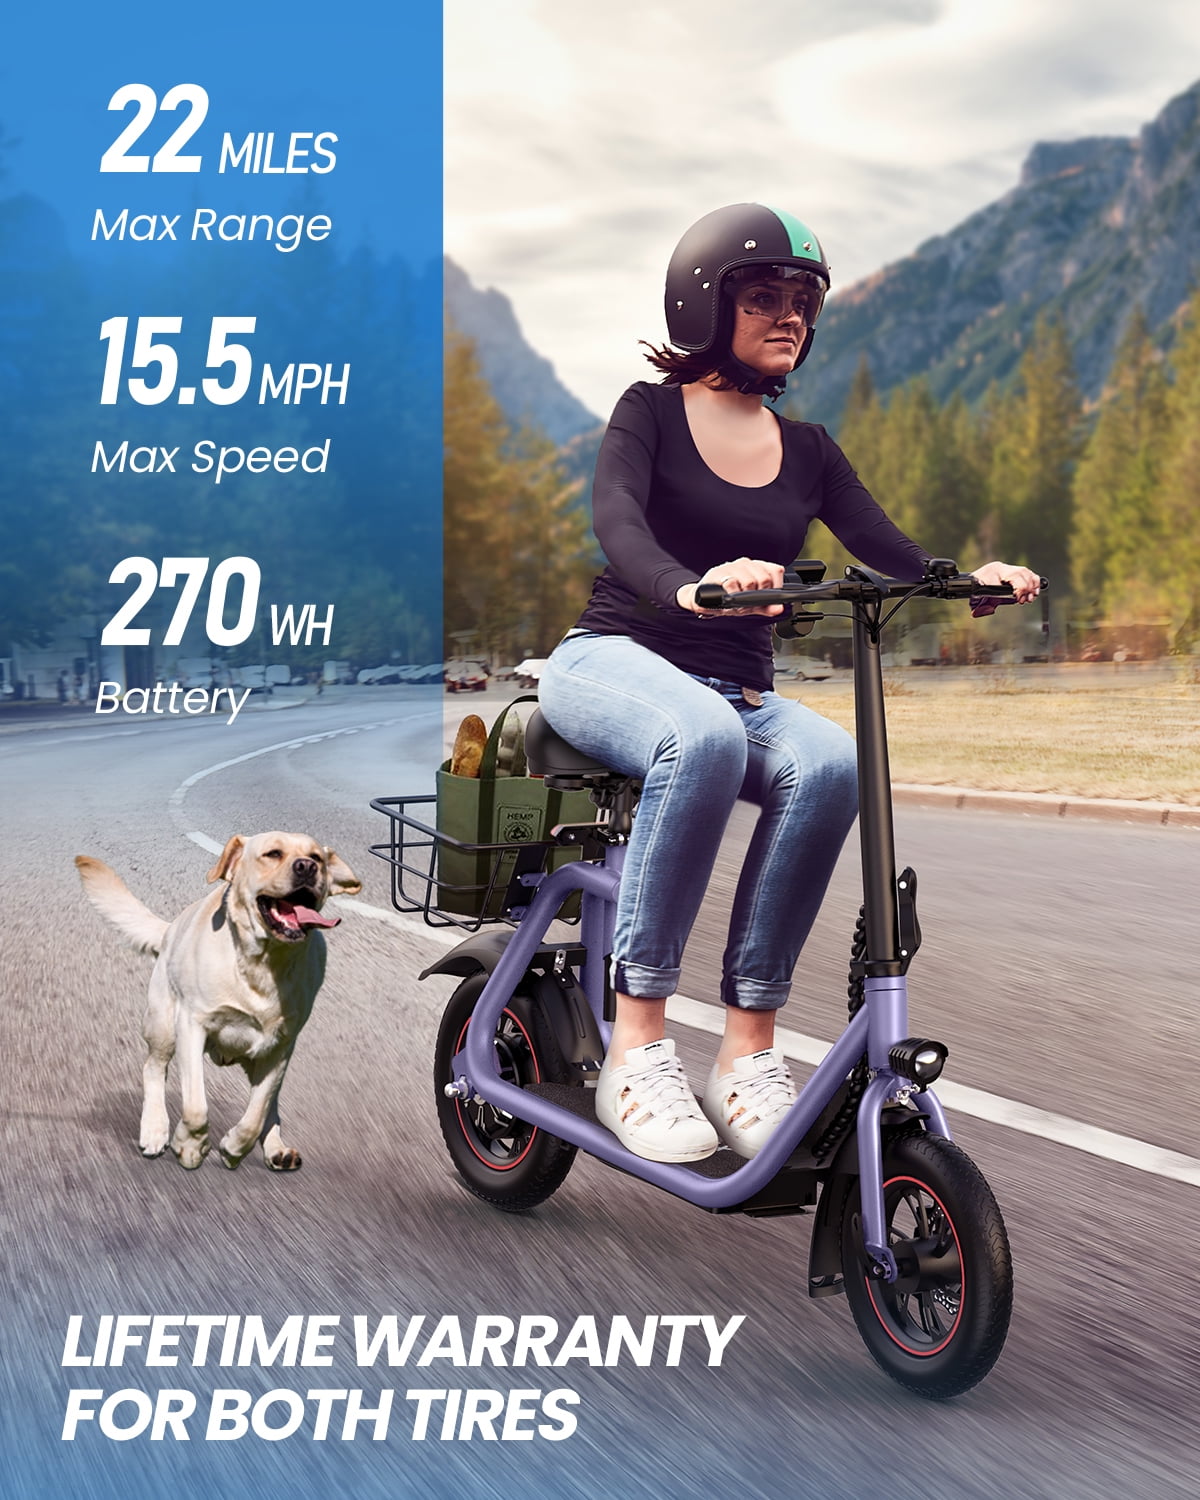 URBANMAX C1 Electric Scooter with Seat, 450W Powerful Motor up to 22 Miles  Range, Folding Electric Scooter for Adult Max Speed 15.5Mph, Electric  Scooter for Commuting with Basket-Purple